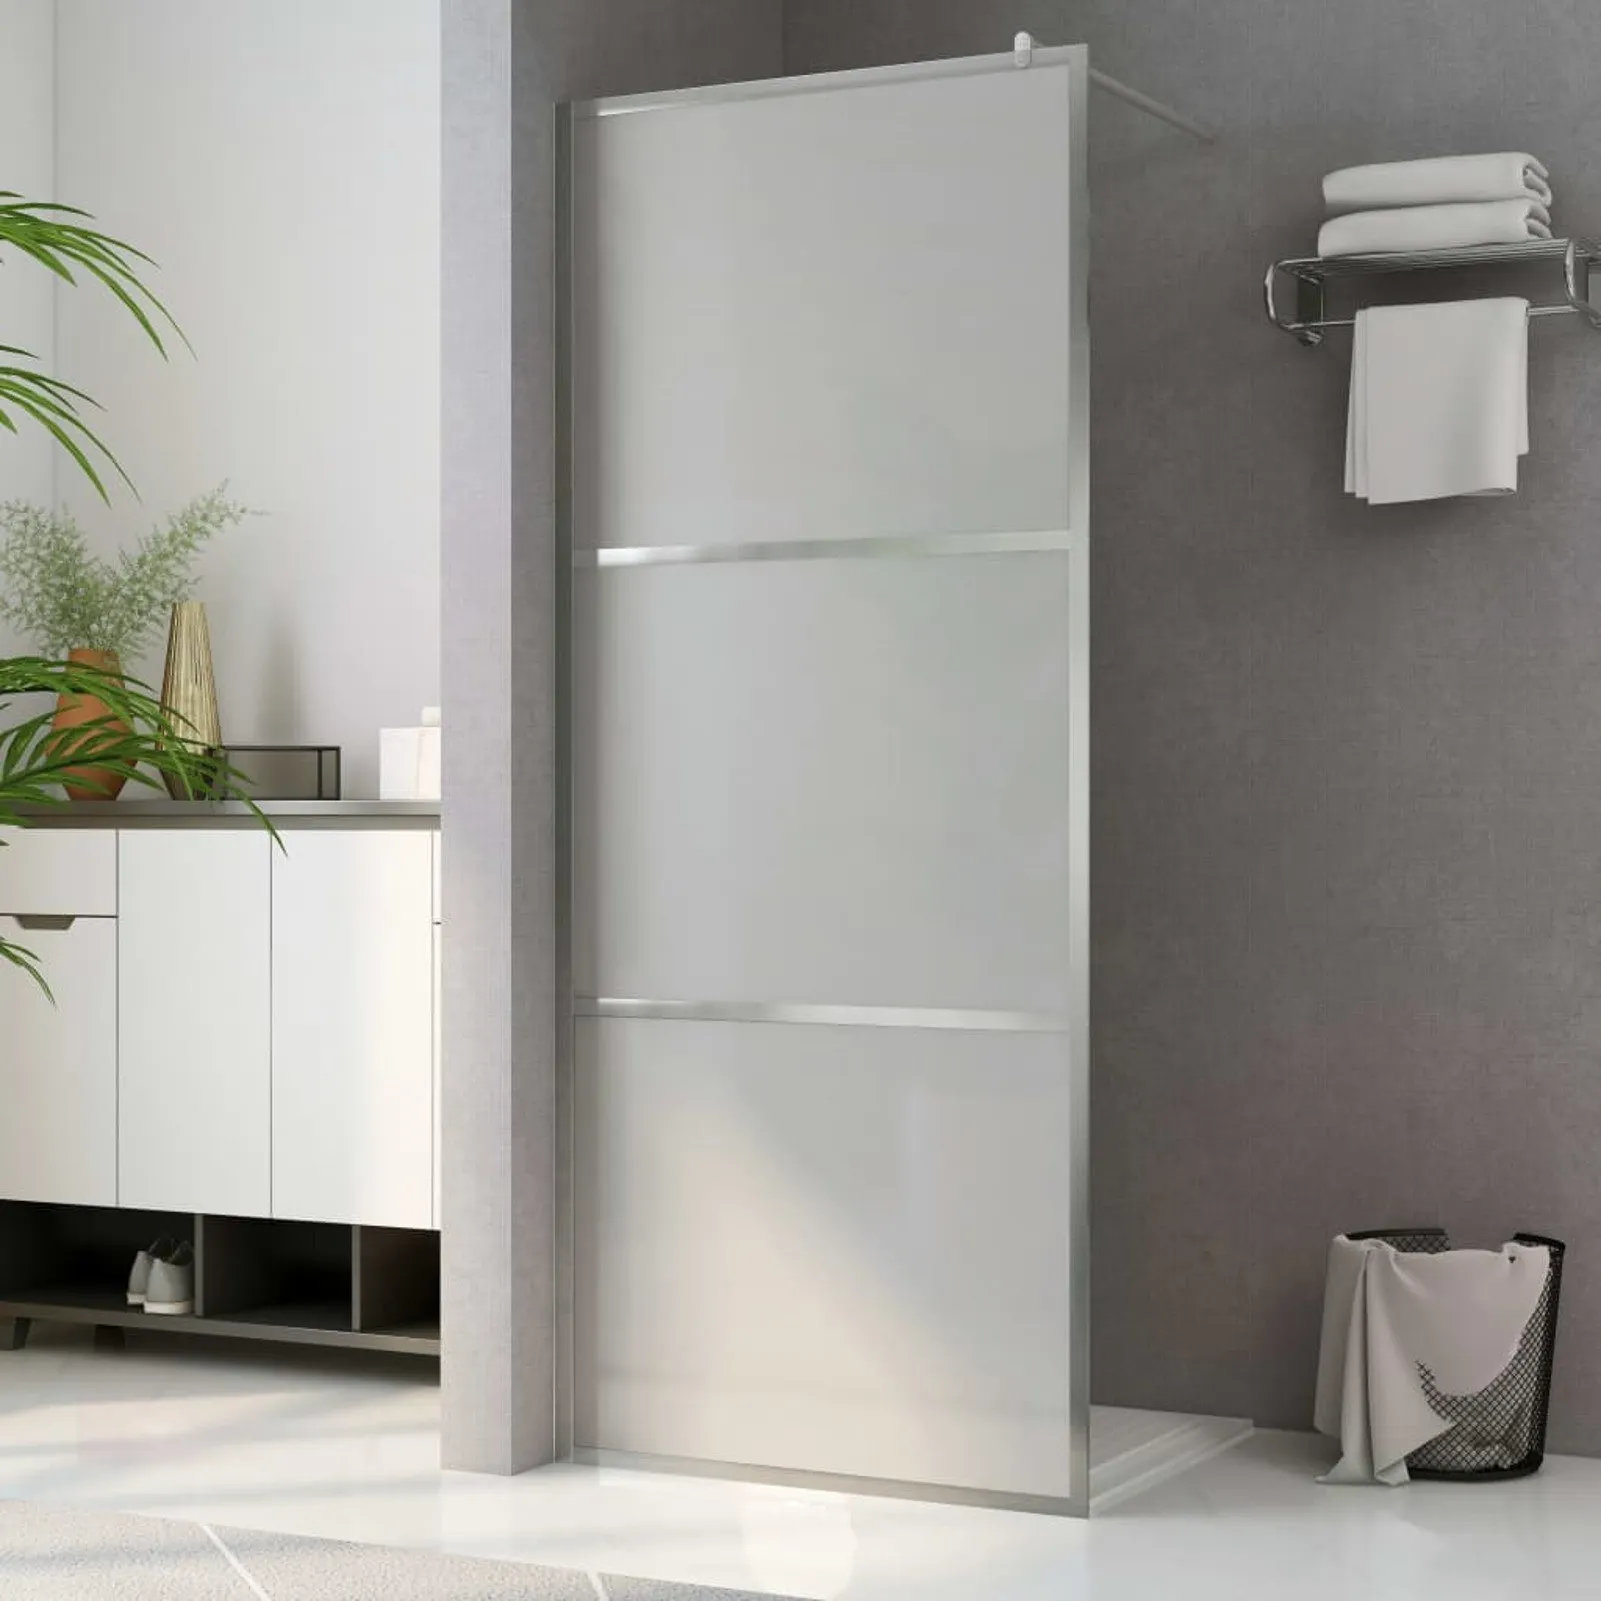 

Walk-in Shower Wall with Whole Frosted ESG Glass 39.4"x76.8"